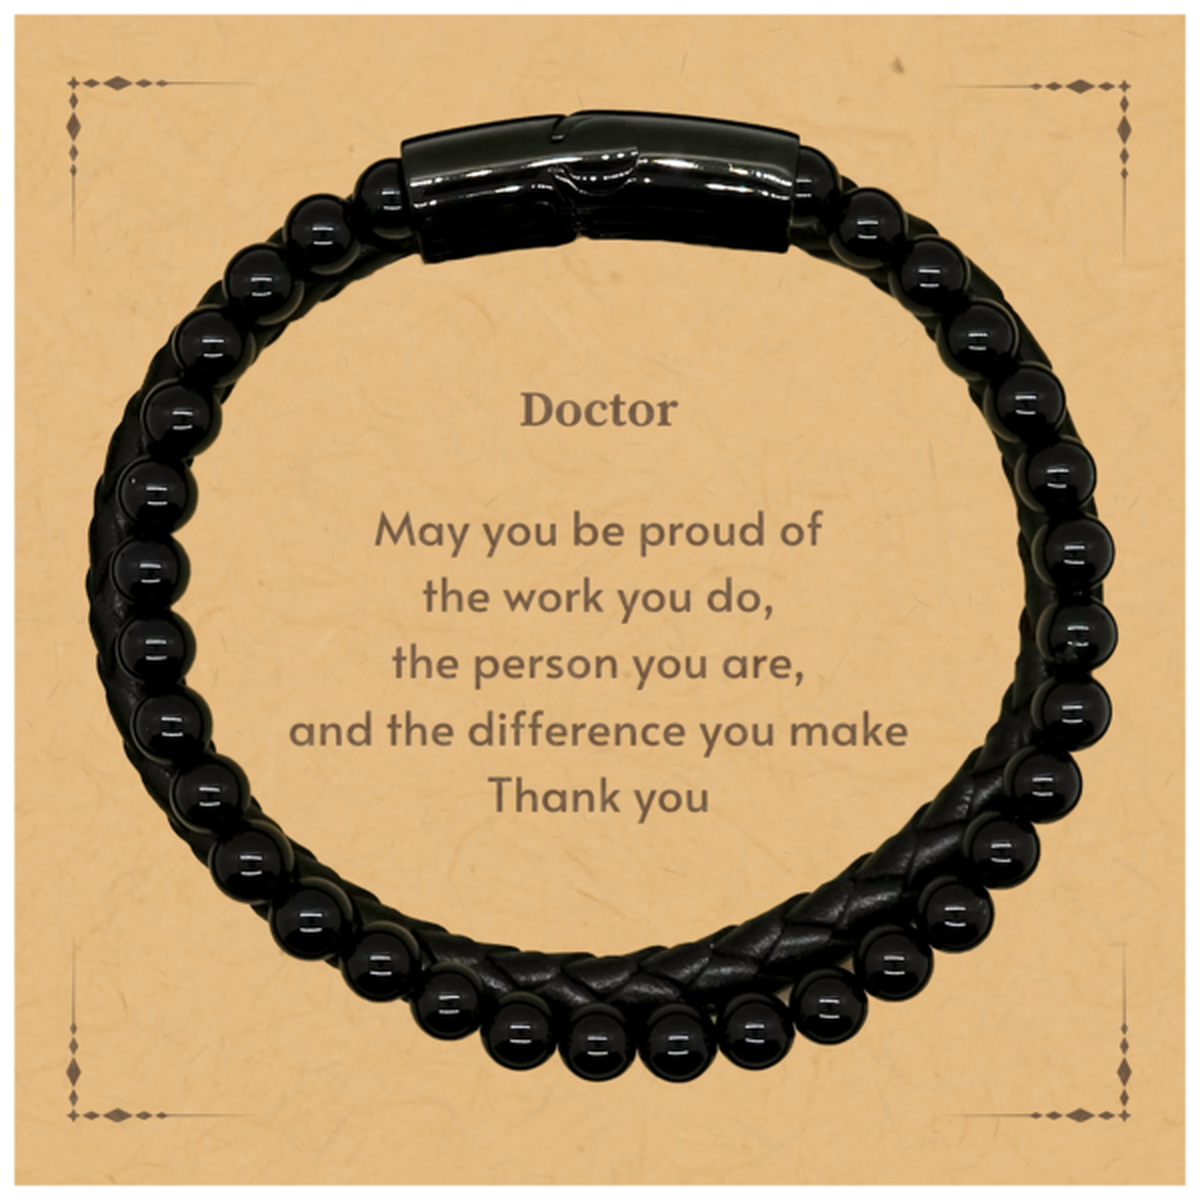 Heartwarming Stone Leather Bracelets Retirement Coworkers Gifts for Doctor, Doctor May You be proud of the work you do, the person you are Gifts for Boss Men Women Friends